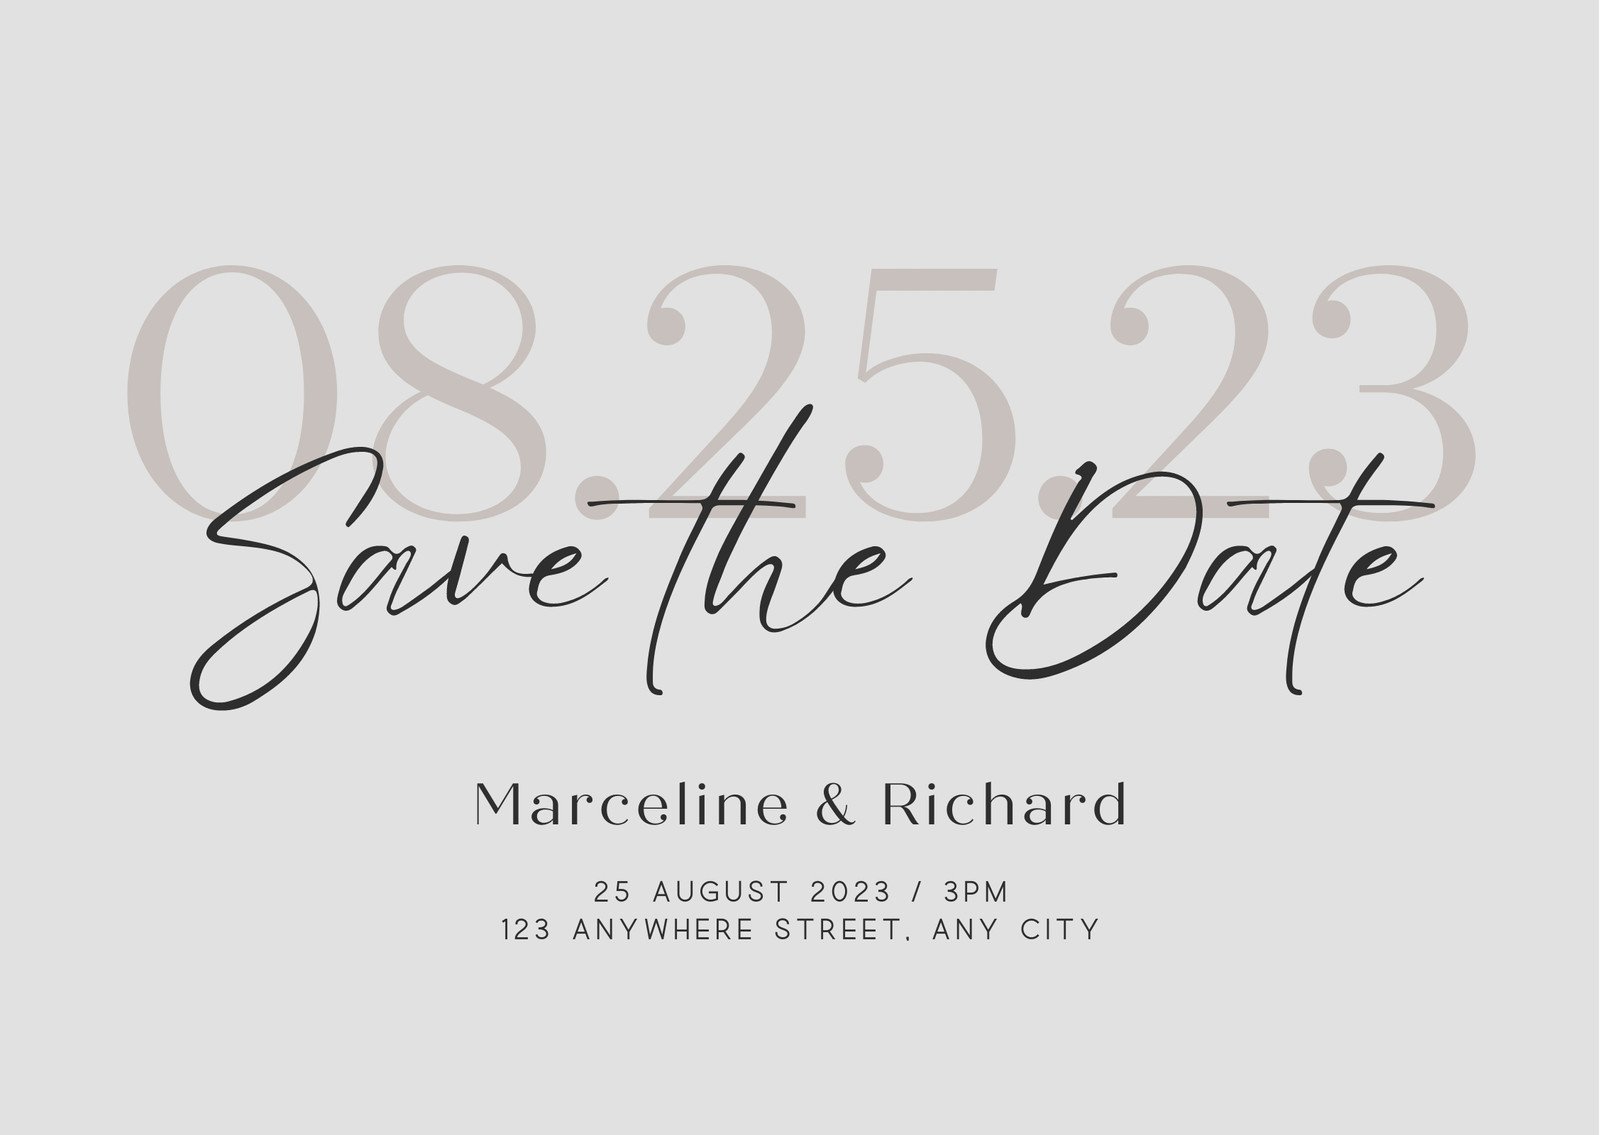 Save The Date Cards | Personalize & Order Prints From Canva